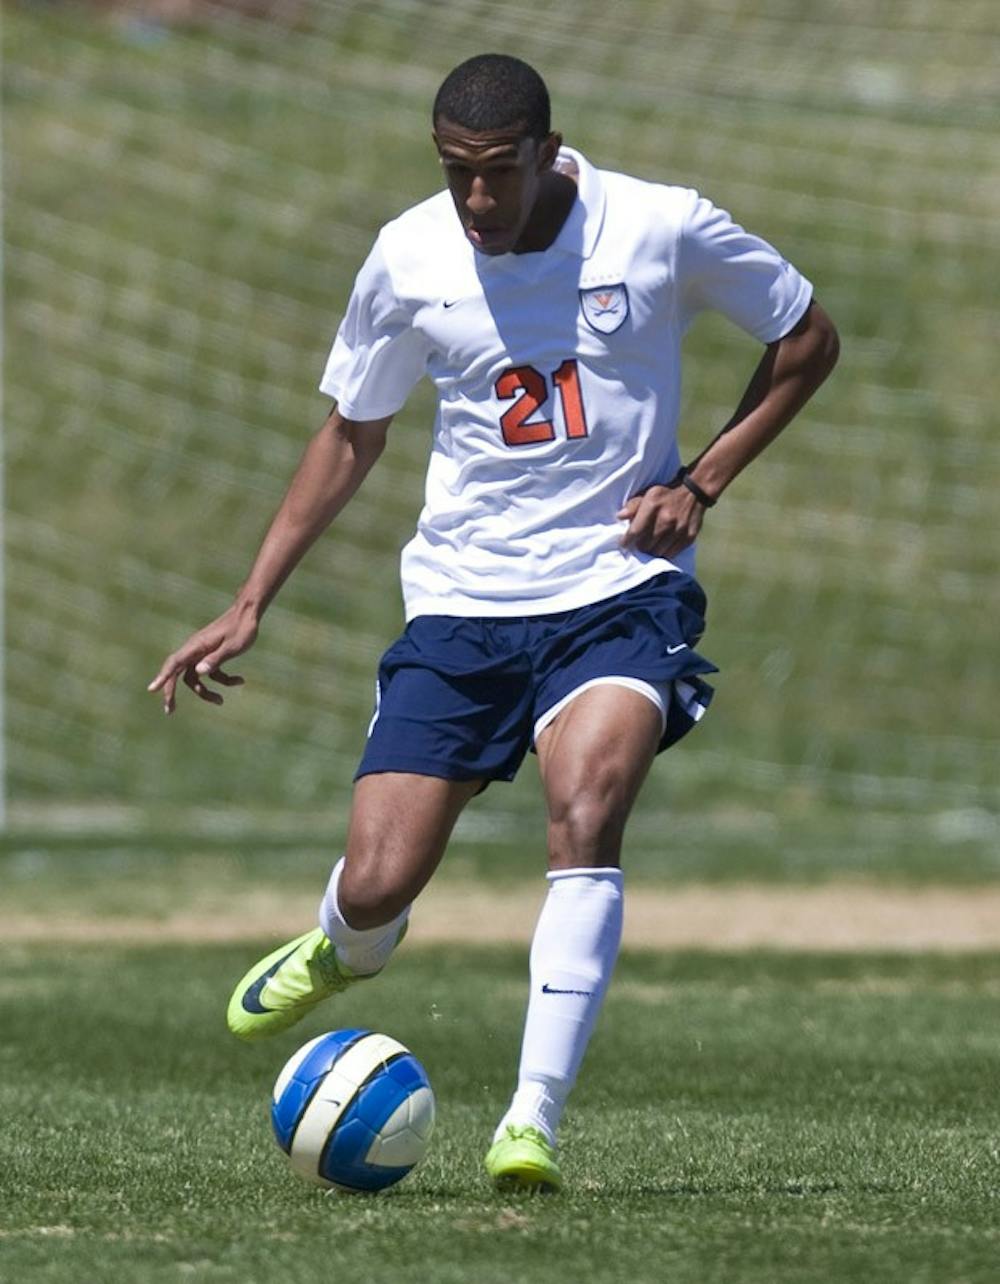 Virginia Cavaliers defender Shawn Barry (21).  The North Carolina State Wolfpack defeated the Virginia Cavaliers 1-0 in NCAA Men's Soccer during a spring scrimmage at the Klockner Stadium practice field on the Grounds of the University of Virginia in Charlottesville, VA on April 4, 2009.